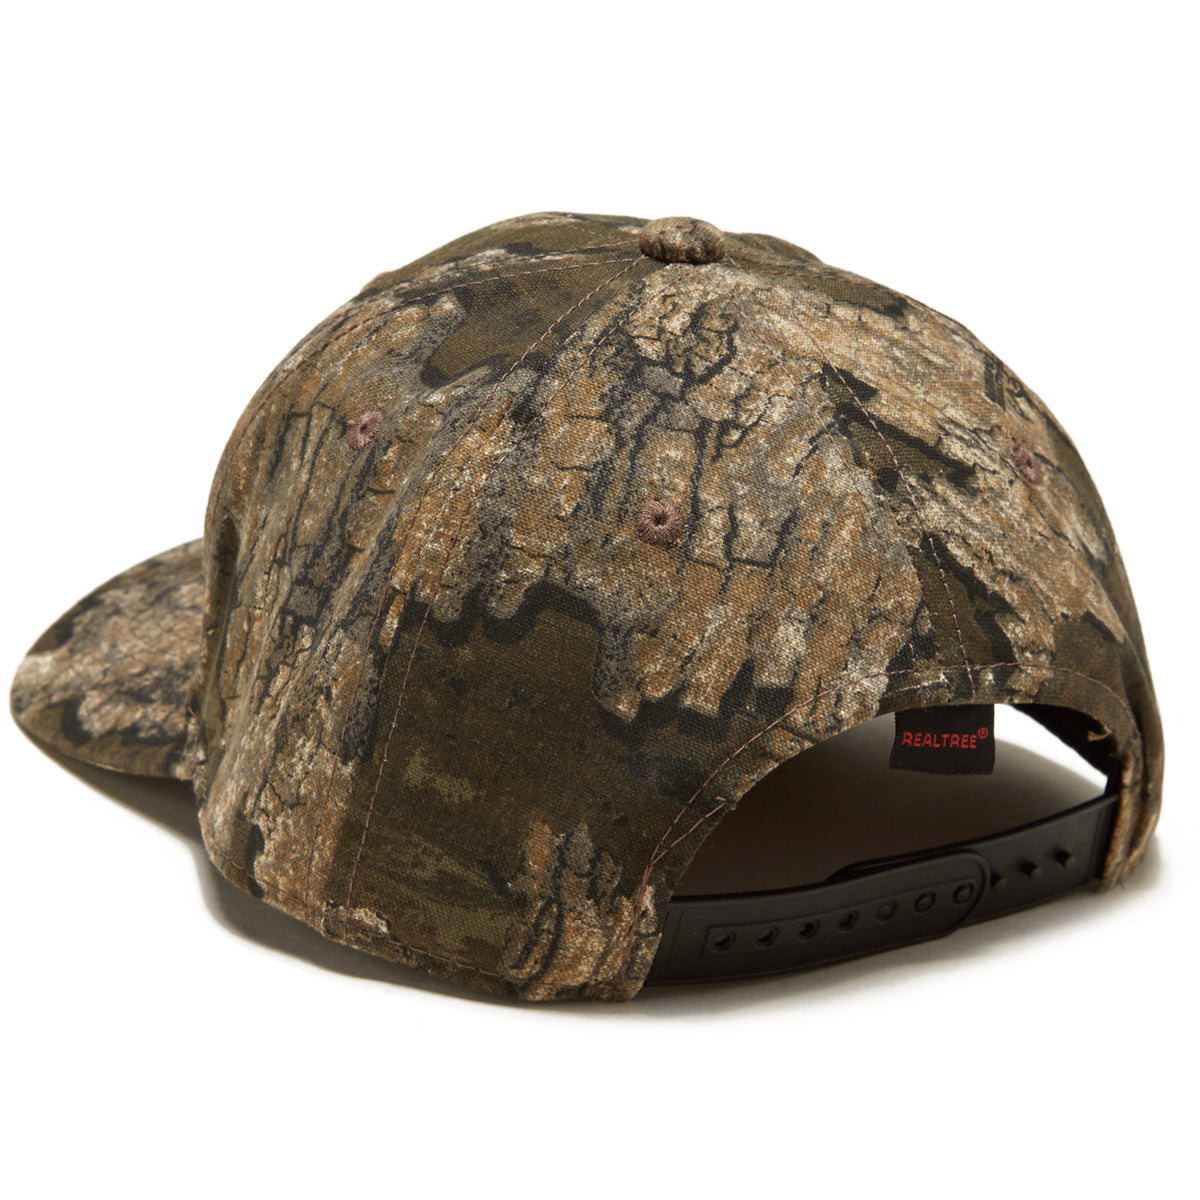 CCS x Realtree Mailorder Patch Hat - Timber image 2